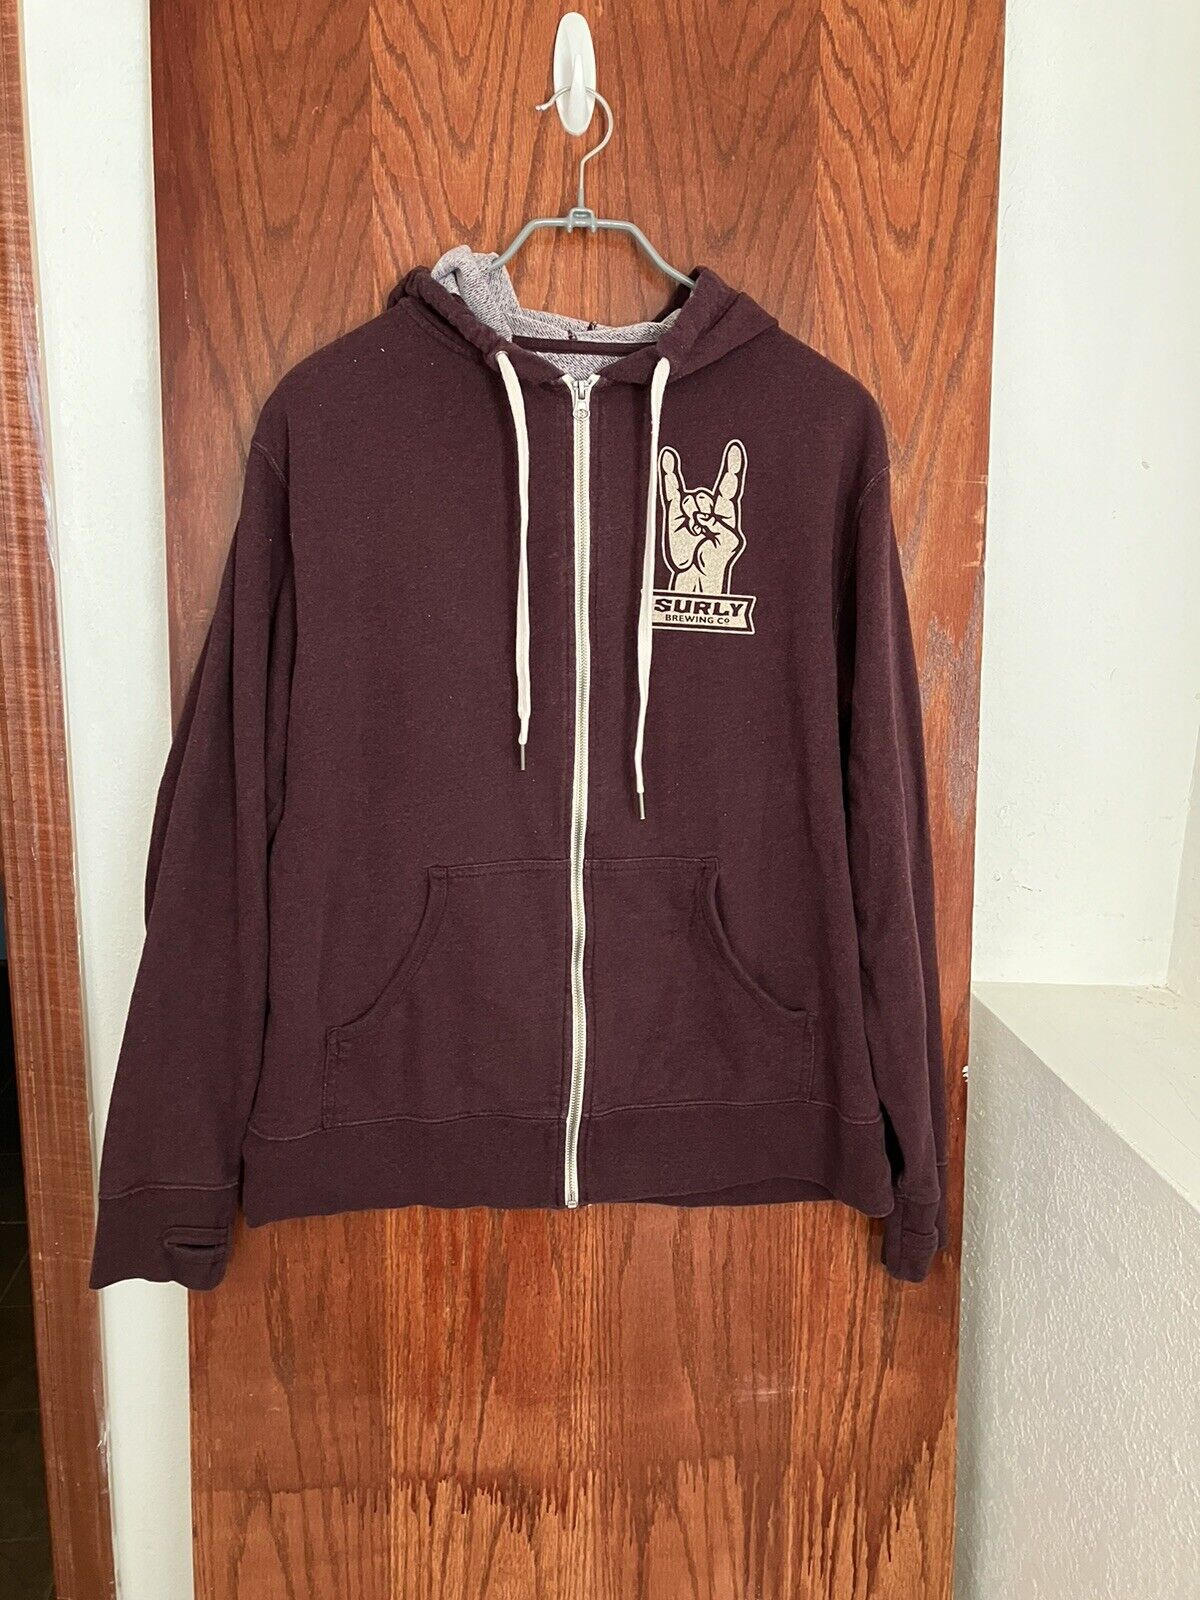 Surly Brewing Company Woman’s Large/XL Lightweight Hoodie Full Zip Maroon 